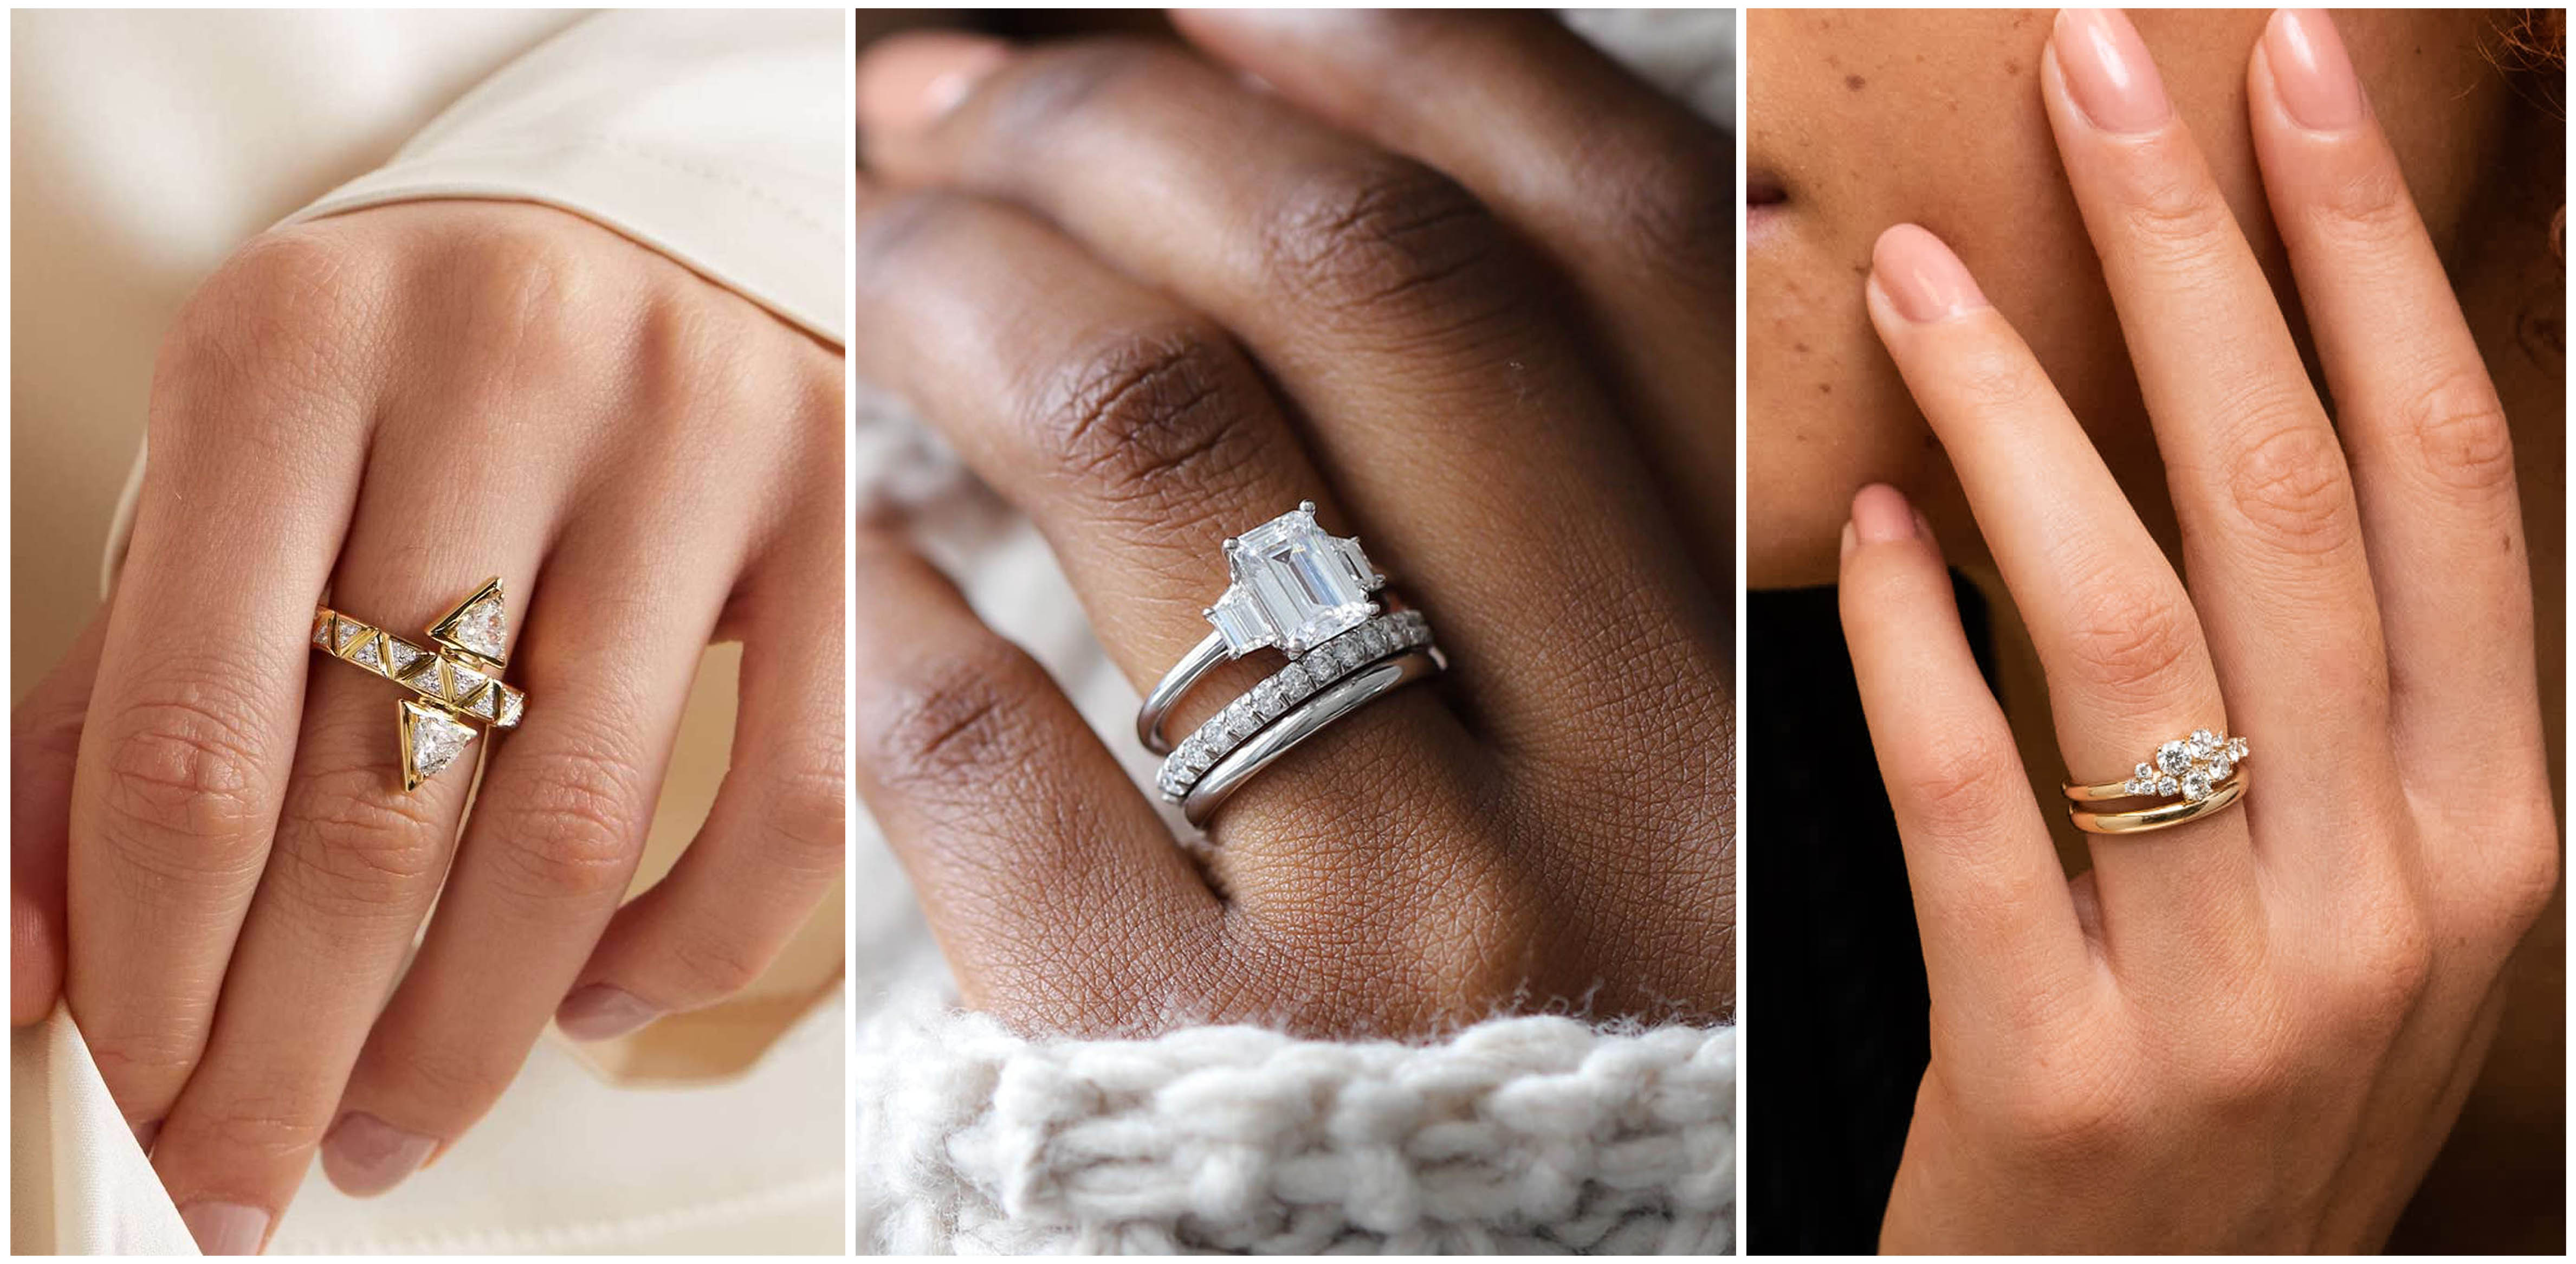 Do wedding and engagement rings have to be the same metal? - Lebrusan Studio